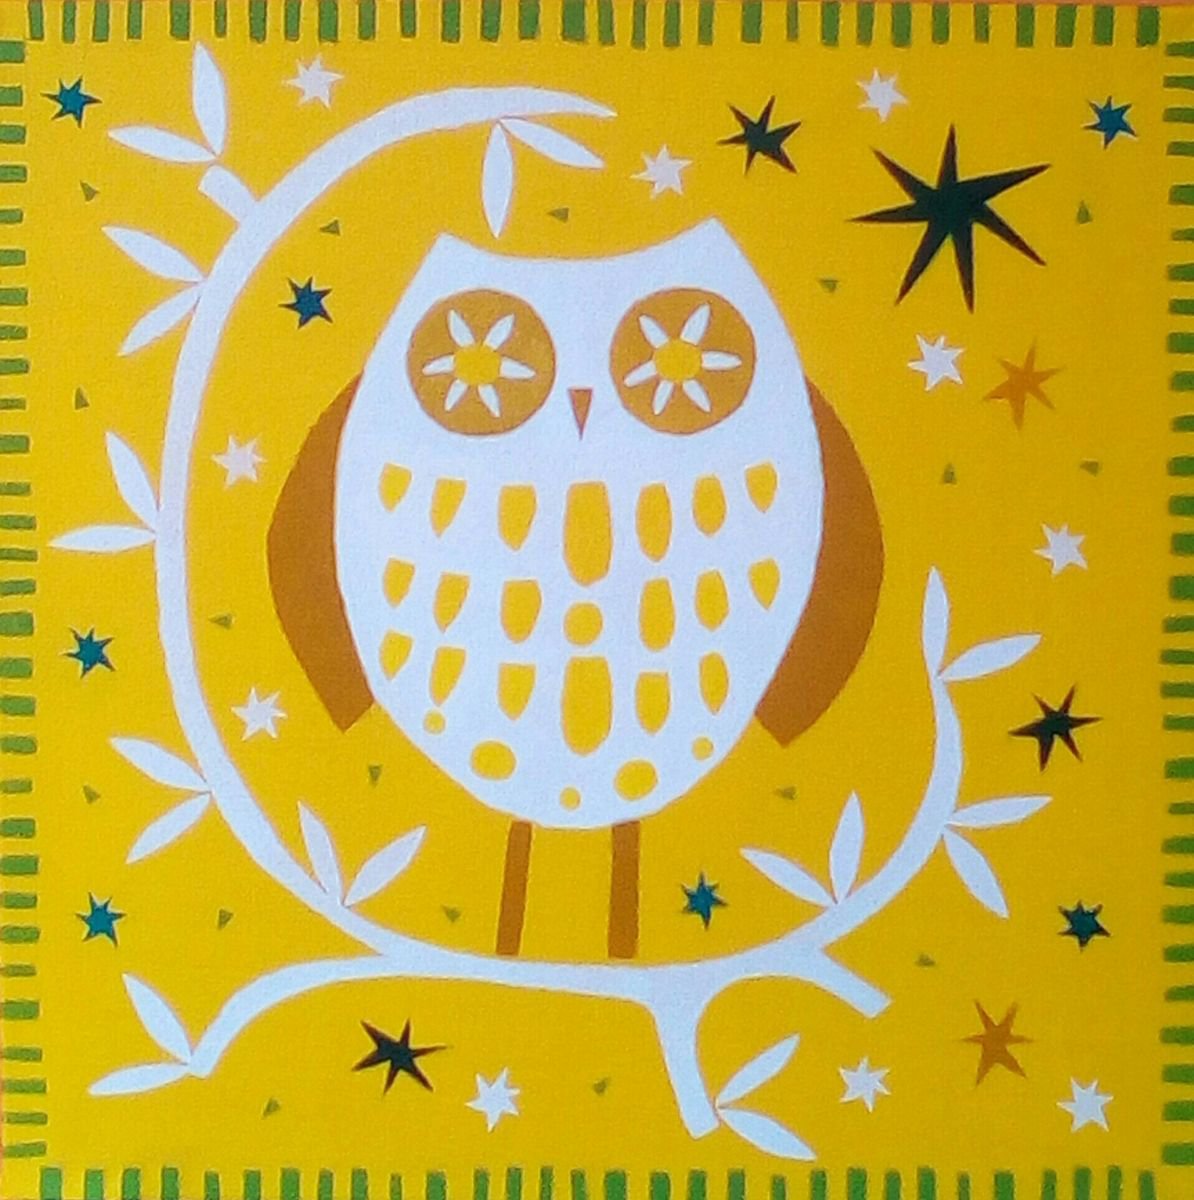 The Owl and the Stars. by Jane Sutherland